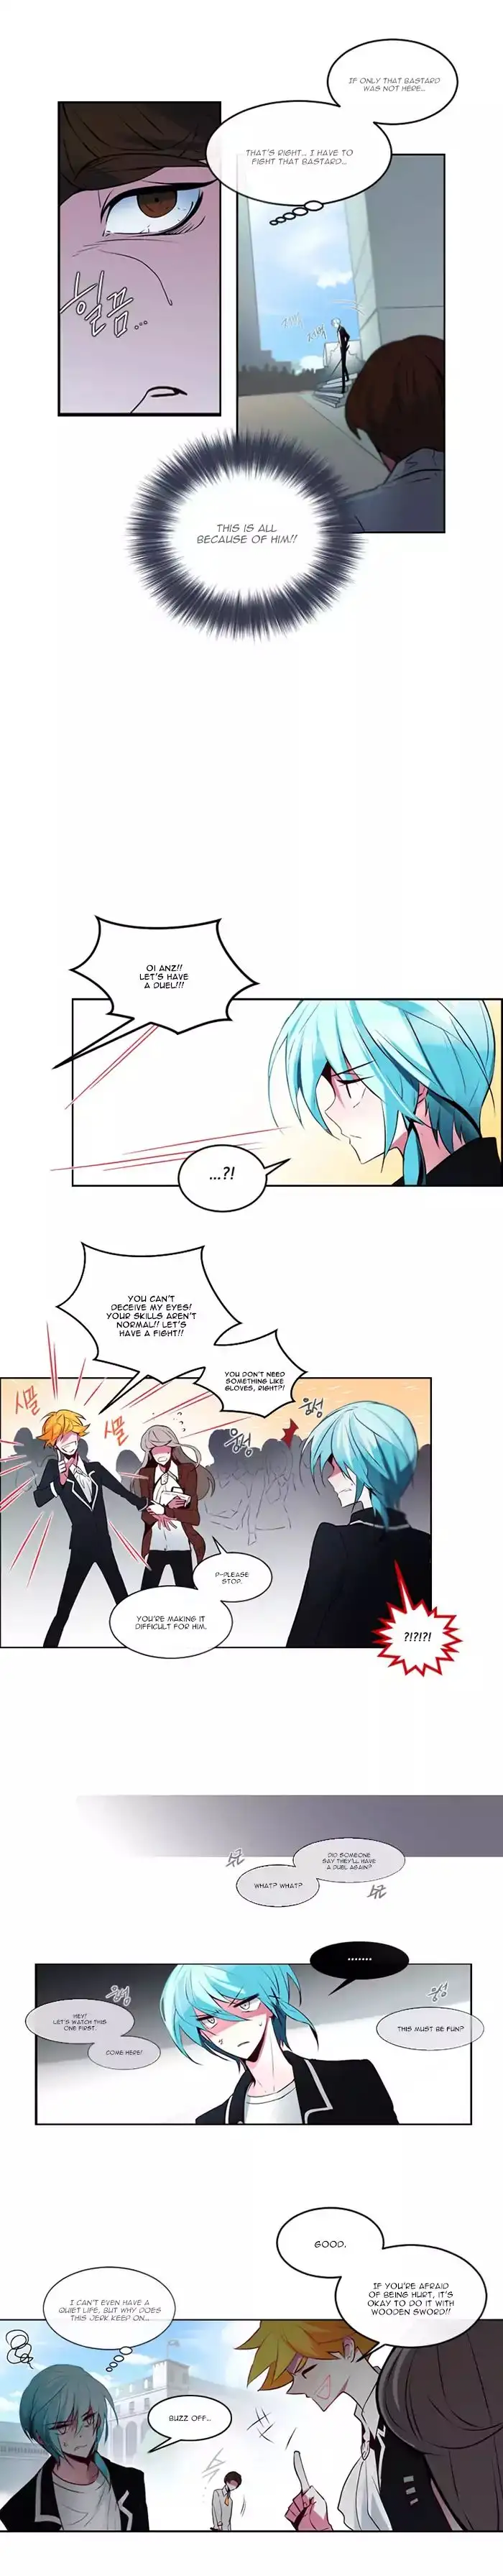 ANZ - Chapter 8 Page 7